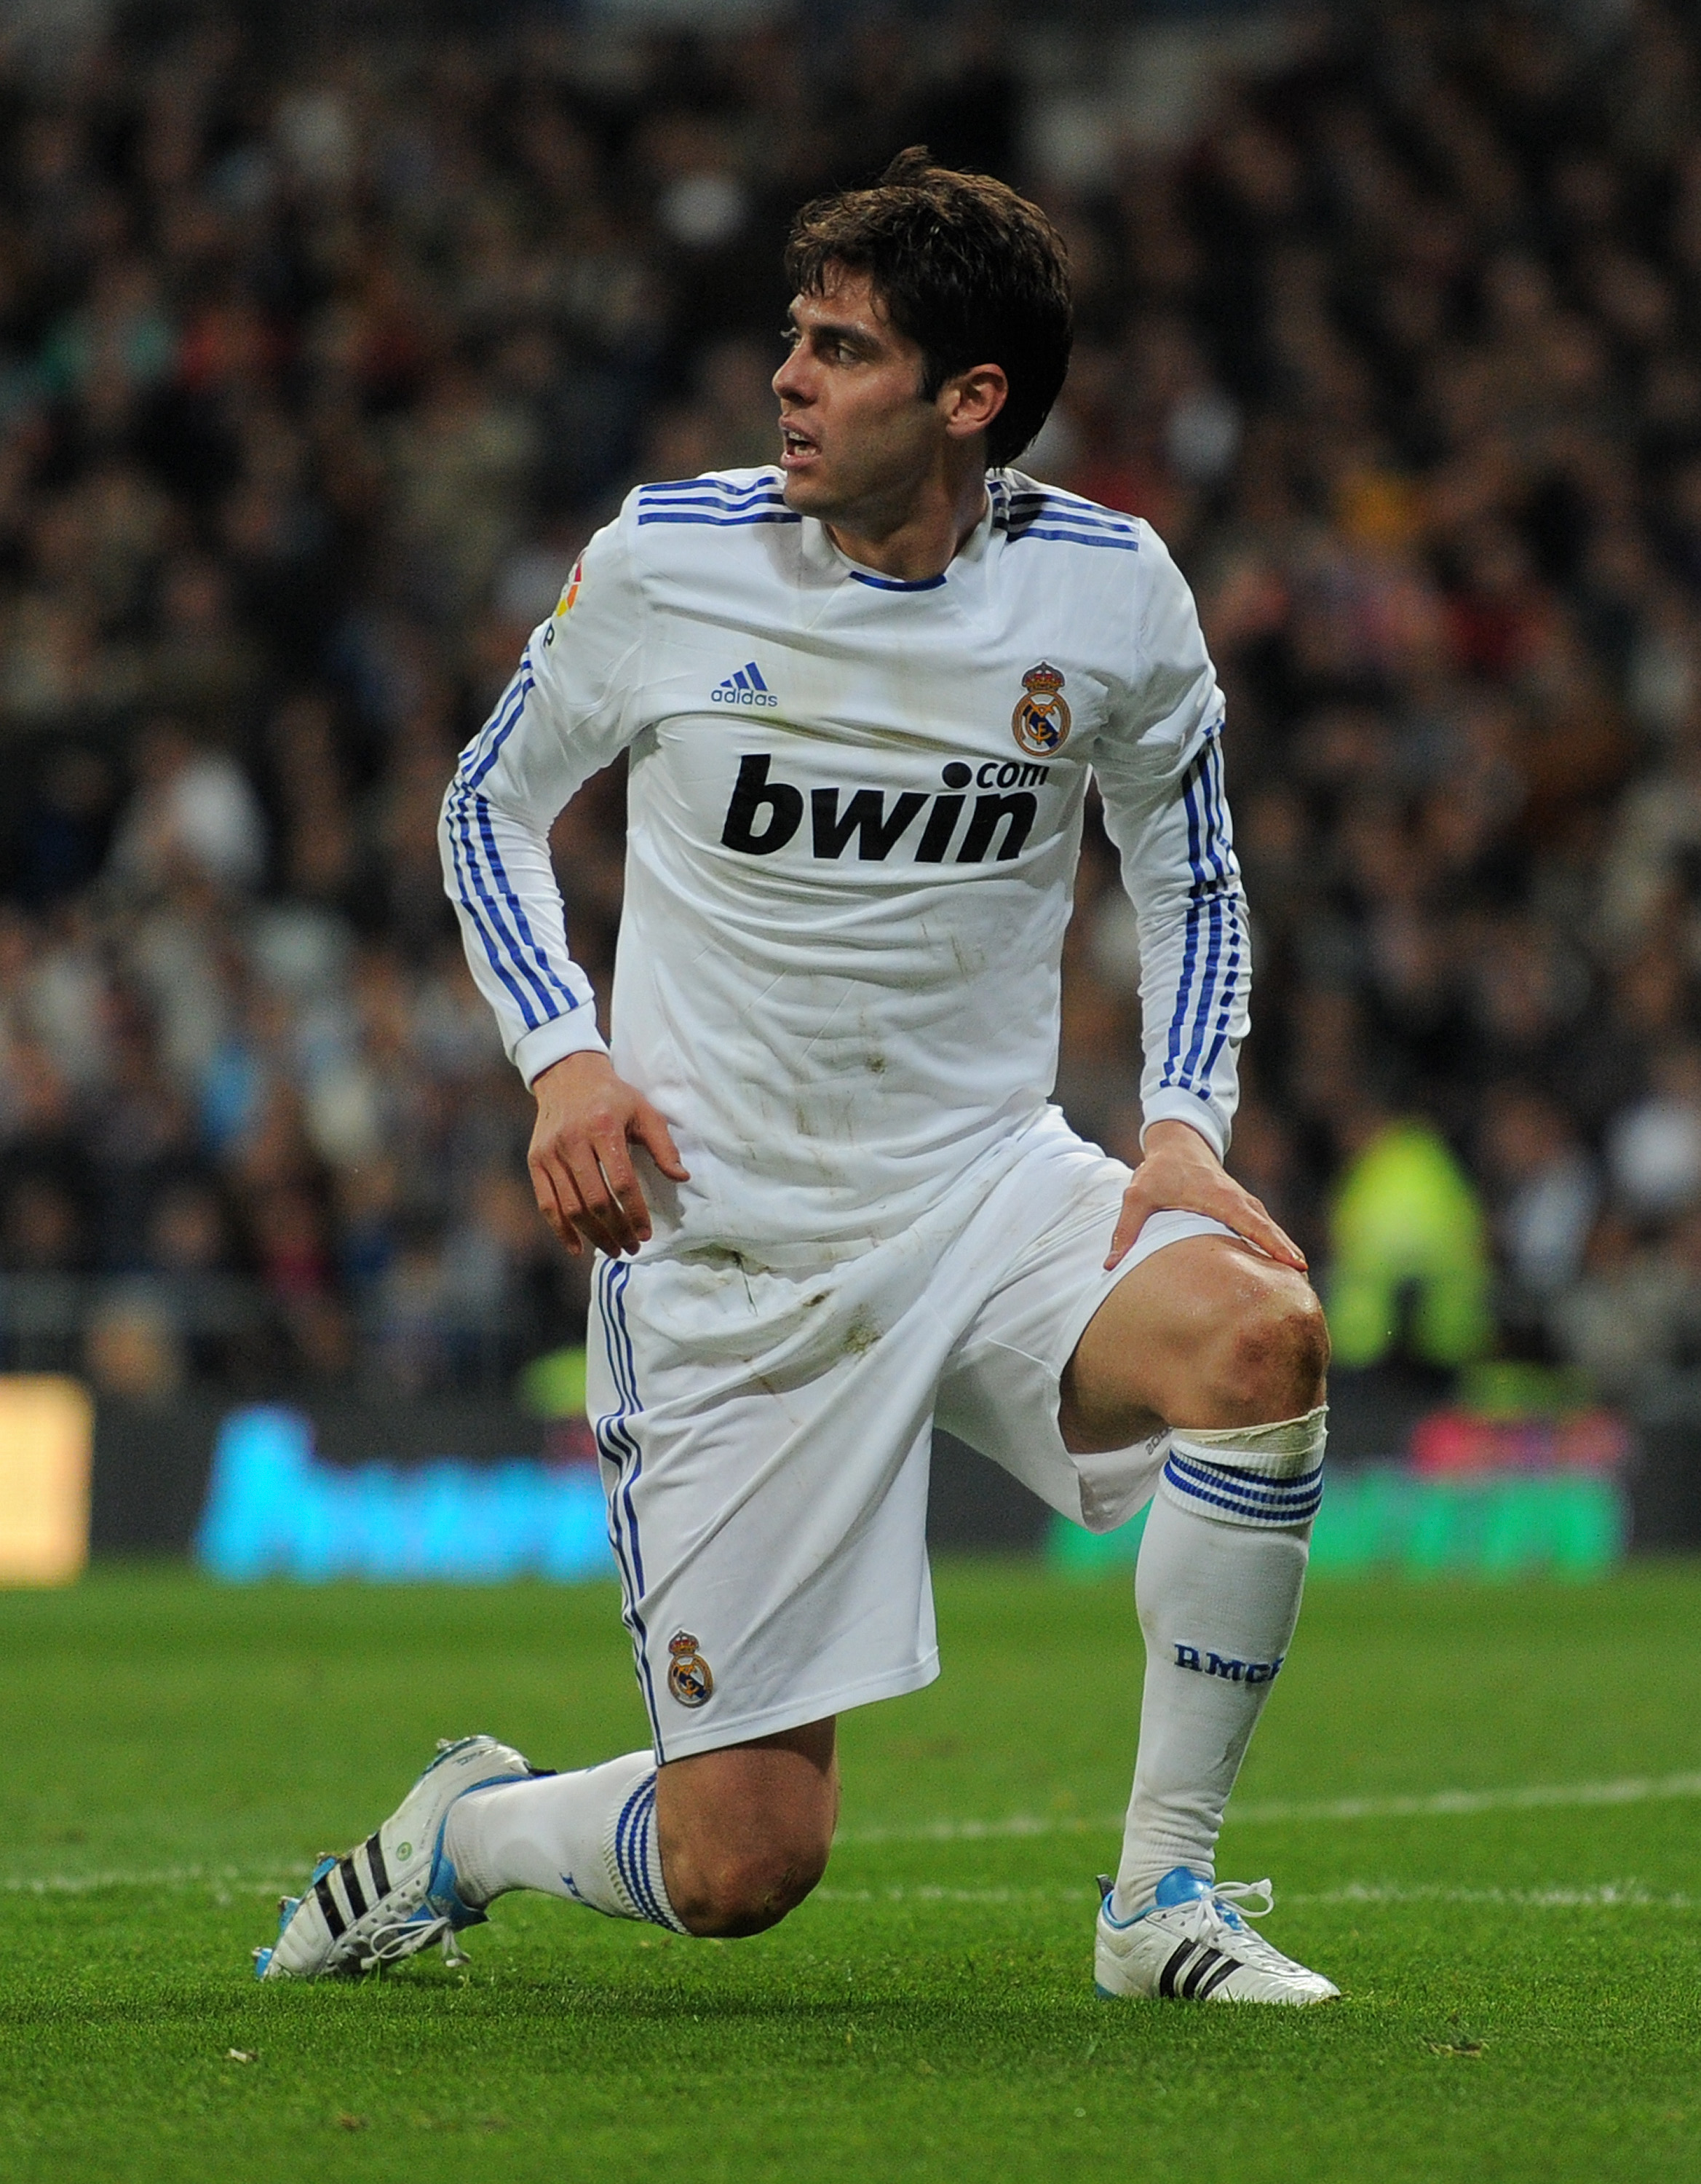 MADRID, SPAIN - FEBRUARY 06:  Kaka of Real Madrid reacts during the la Liga match between Real Madrid and Real Sociedad at Estadio Santiago Bernabeu on February 6, 2011 in Madrid, Spain.  (Photo by Jasper Juinen/Getty Images)